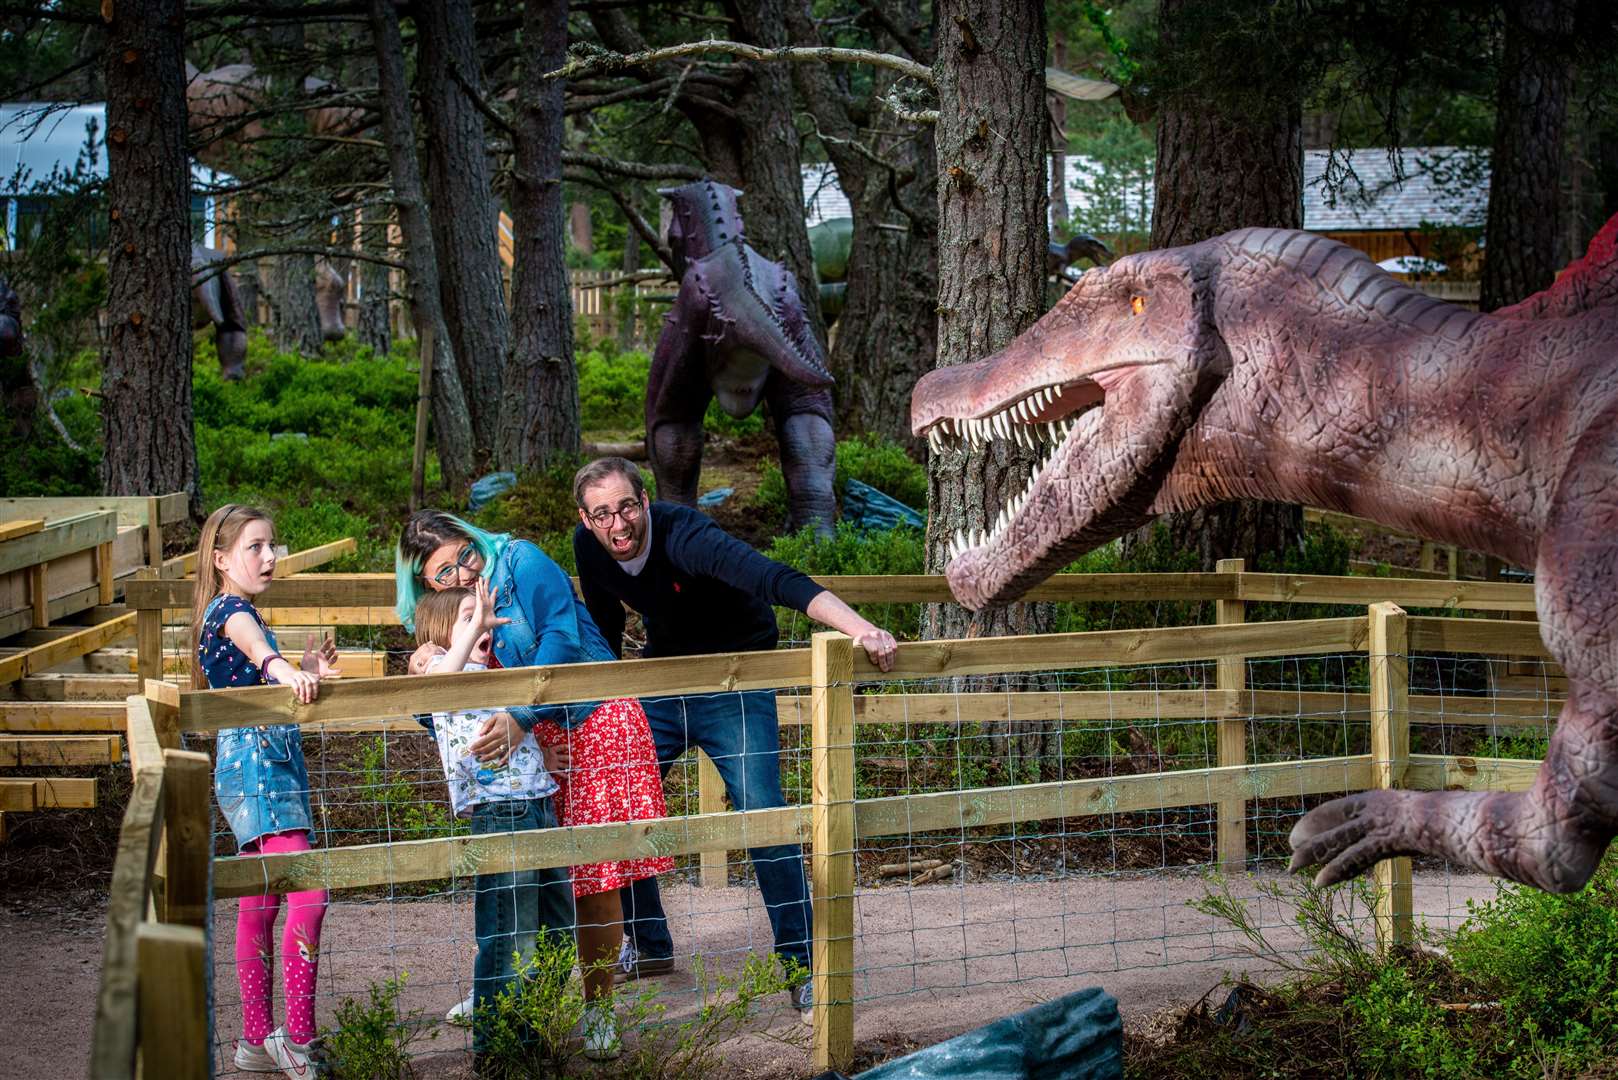 Dinosaur World is one of the most popular attractions at Landmark Forest Adventure Park.